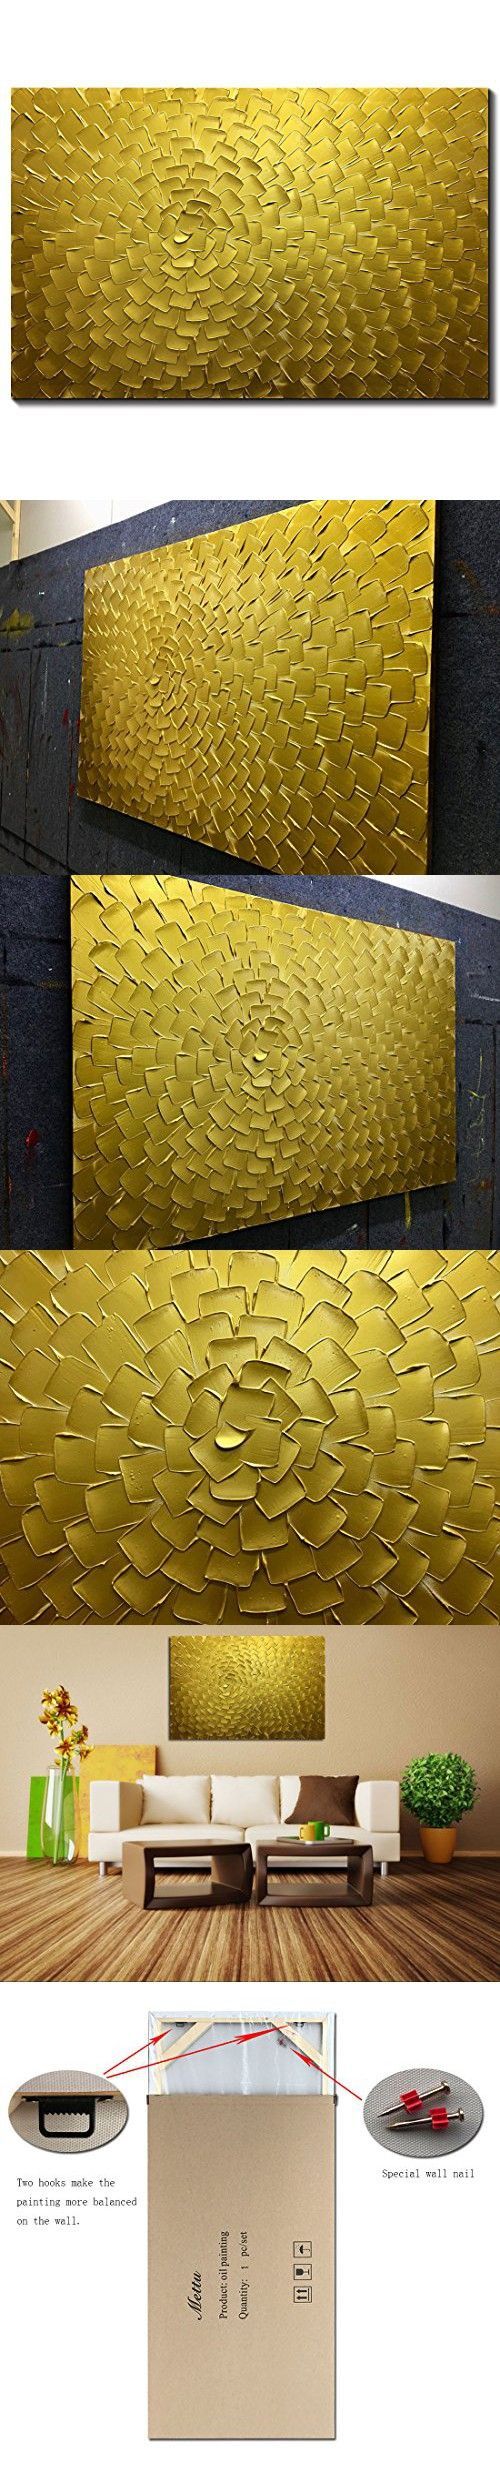 Metuu Oil Paintings, Golden Flower Color Gradients With Regard To Most Popular Gradient Wall Art (View 10 of 20)